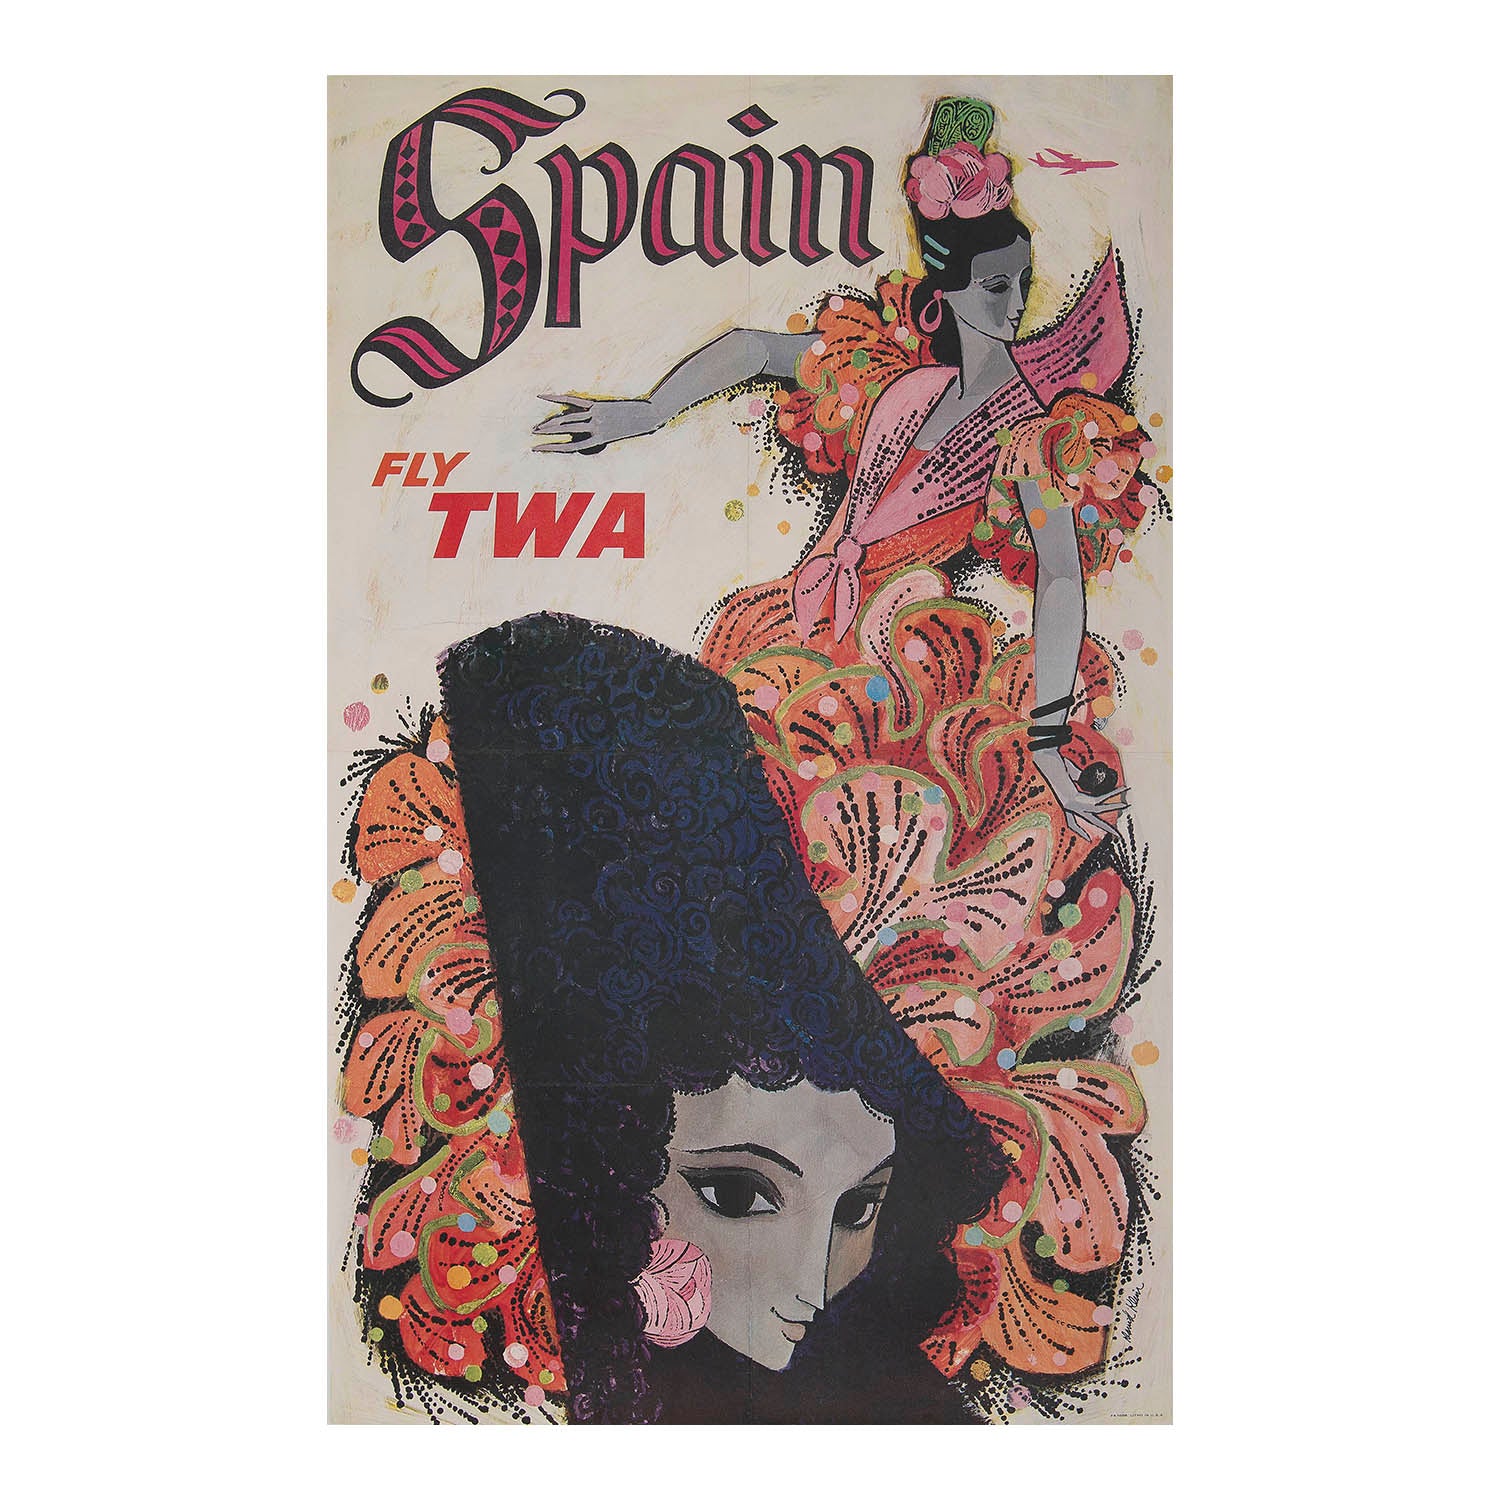 Trans World Airlines (TWA) poster promoting flights to Spain, c. 1960. The design features two Spanish female dancers. The main figure is wearing a "traje de flamenca" and playing "castañuelas"